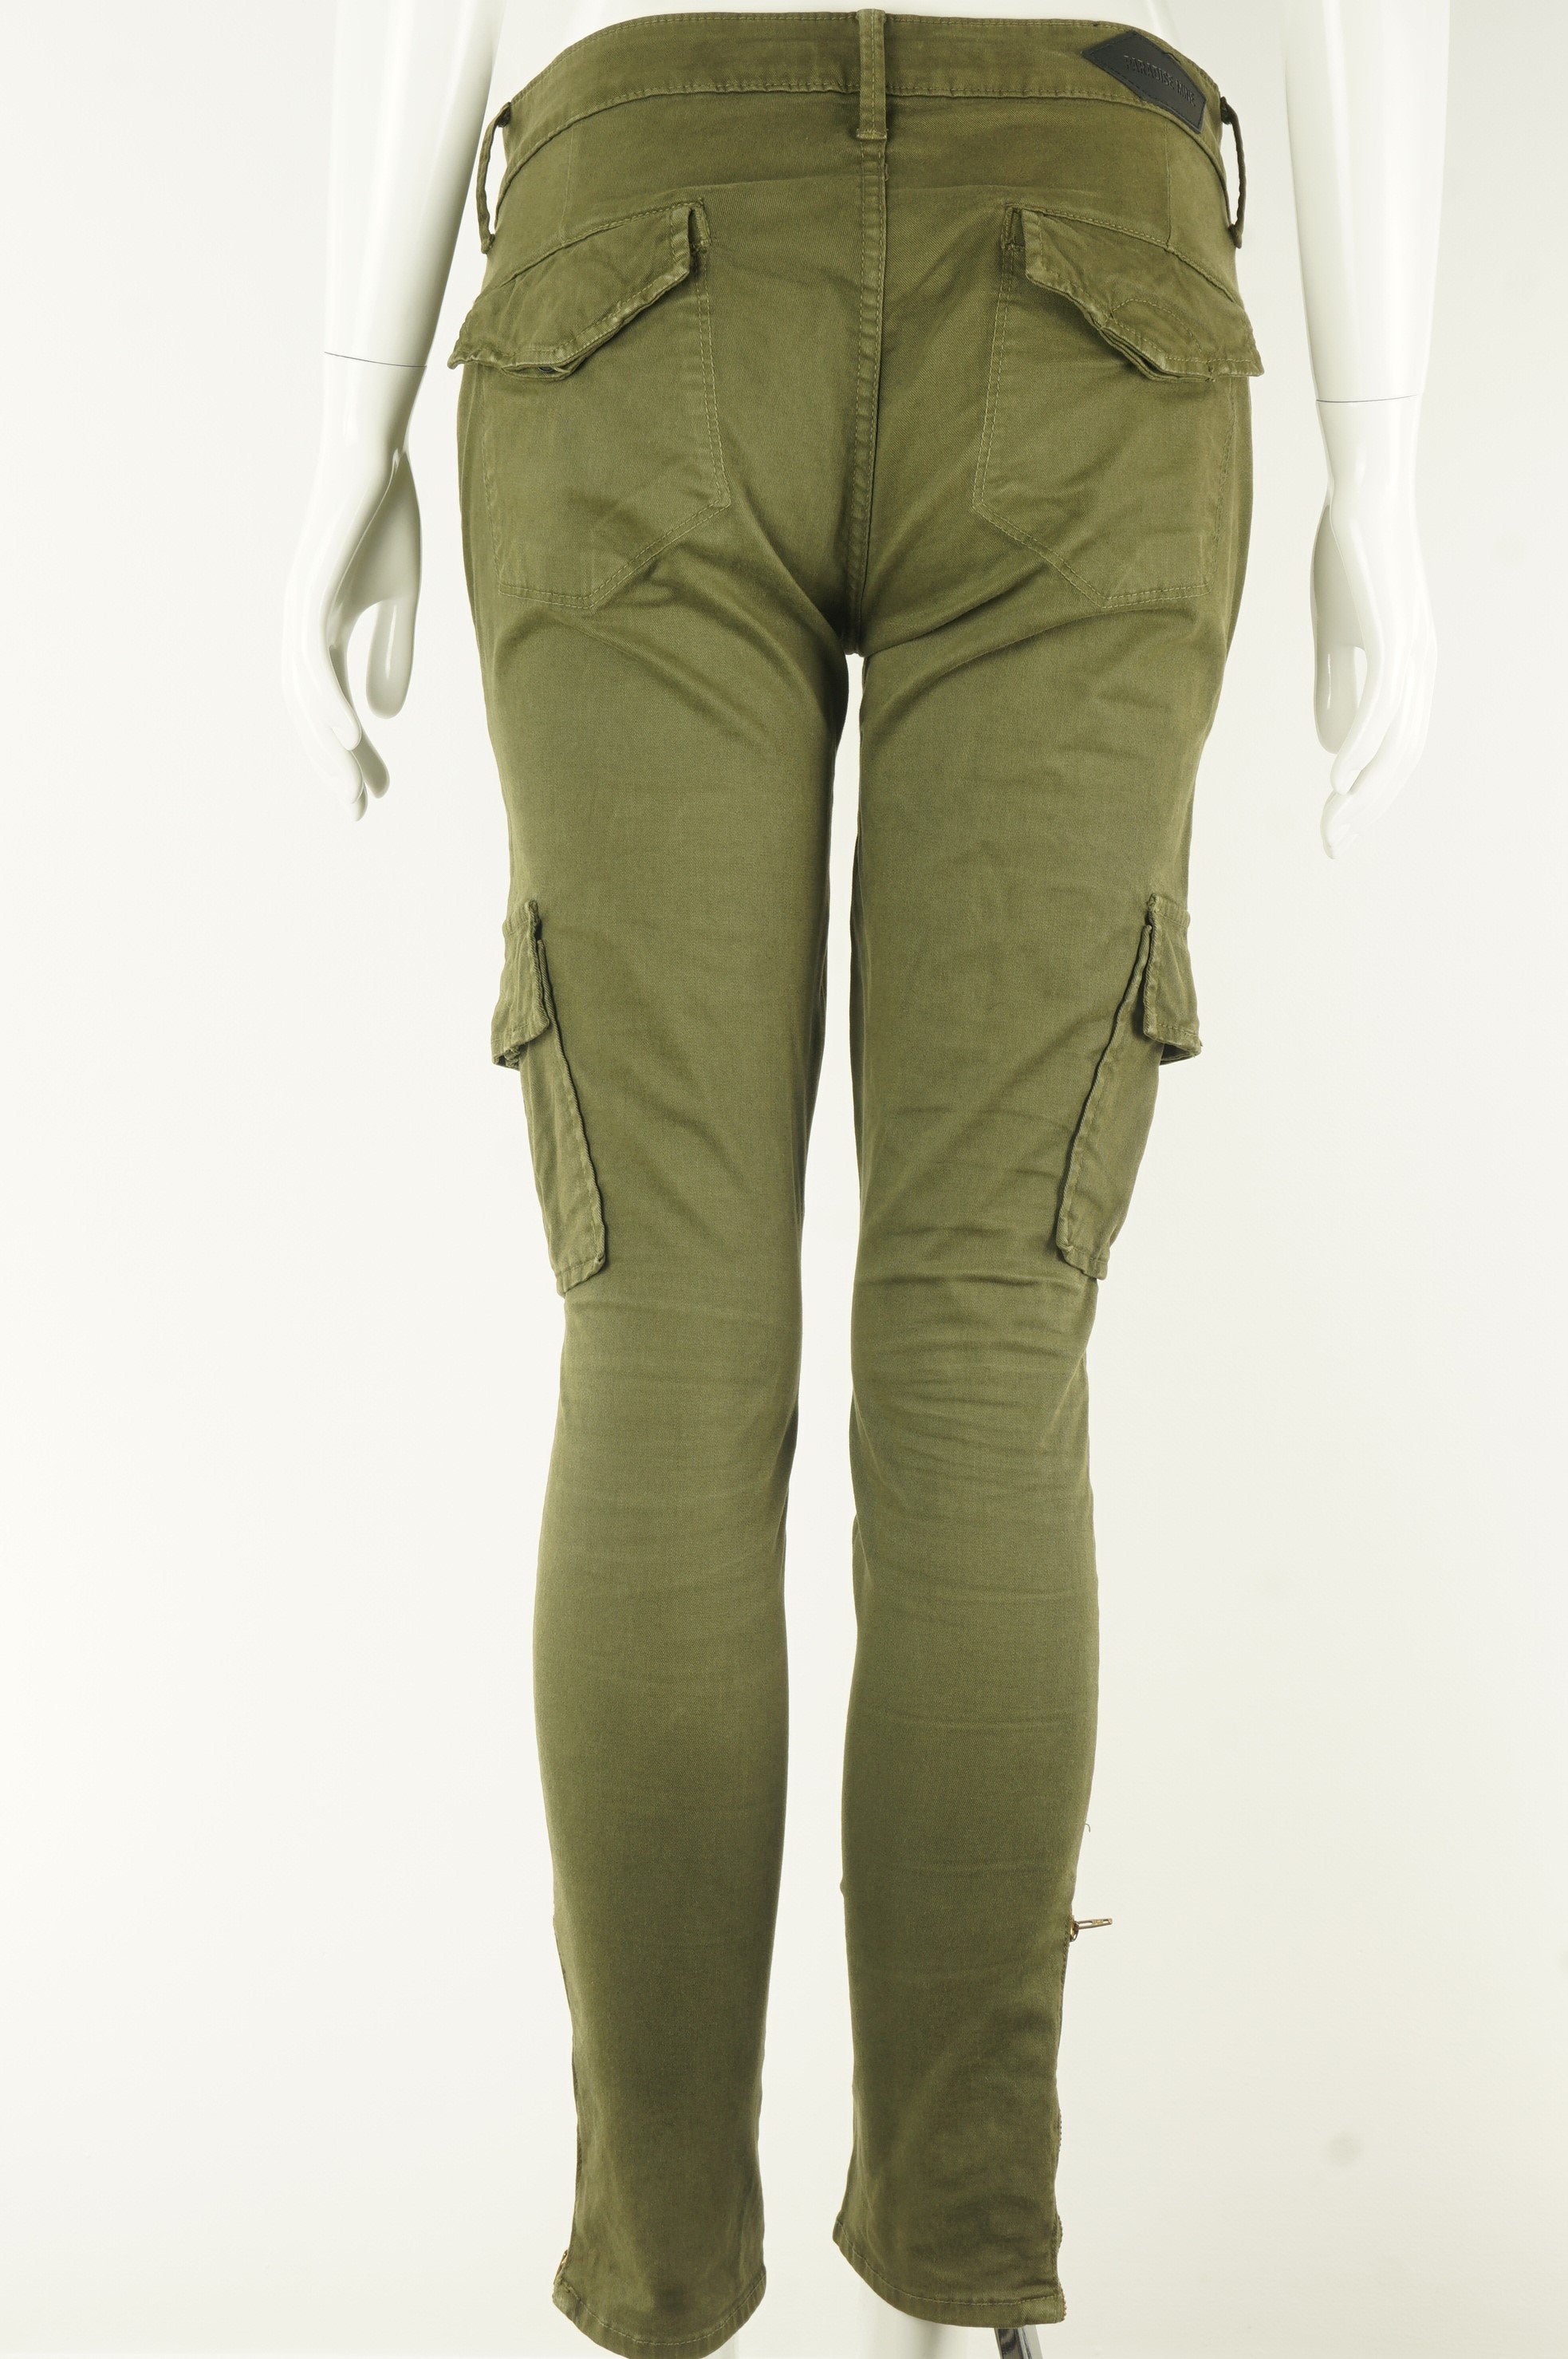 Paradise Mine Army Green Skinny Stretchy Jeans, The cool kinda pair of jeans with lots of pockets. , Green, 97% Cotton, 3% Spandex, women's Pants & Shorts, women's Green Pants & Shorts, Paradise Mine women's Pants & Shorts, women's denim, aritzia women's green jeans/denim